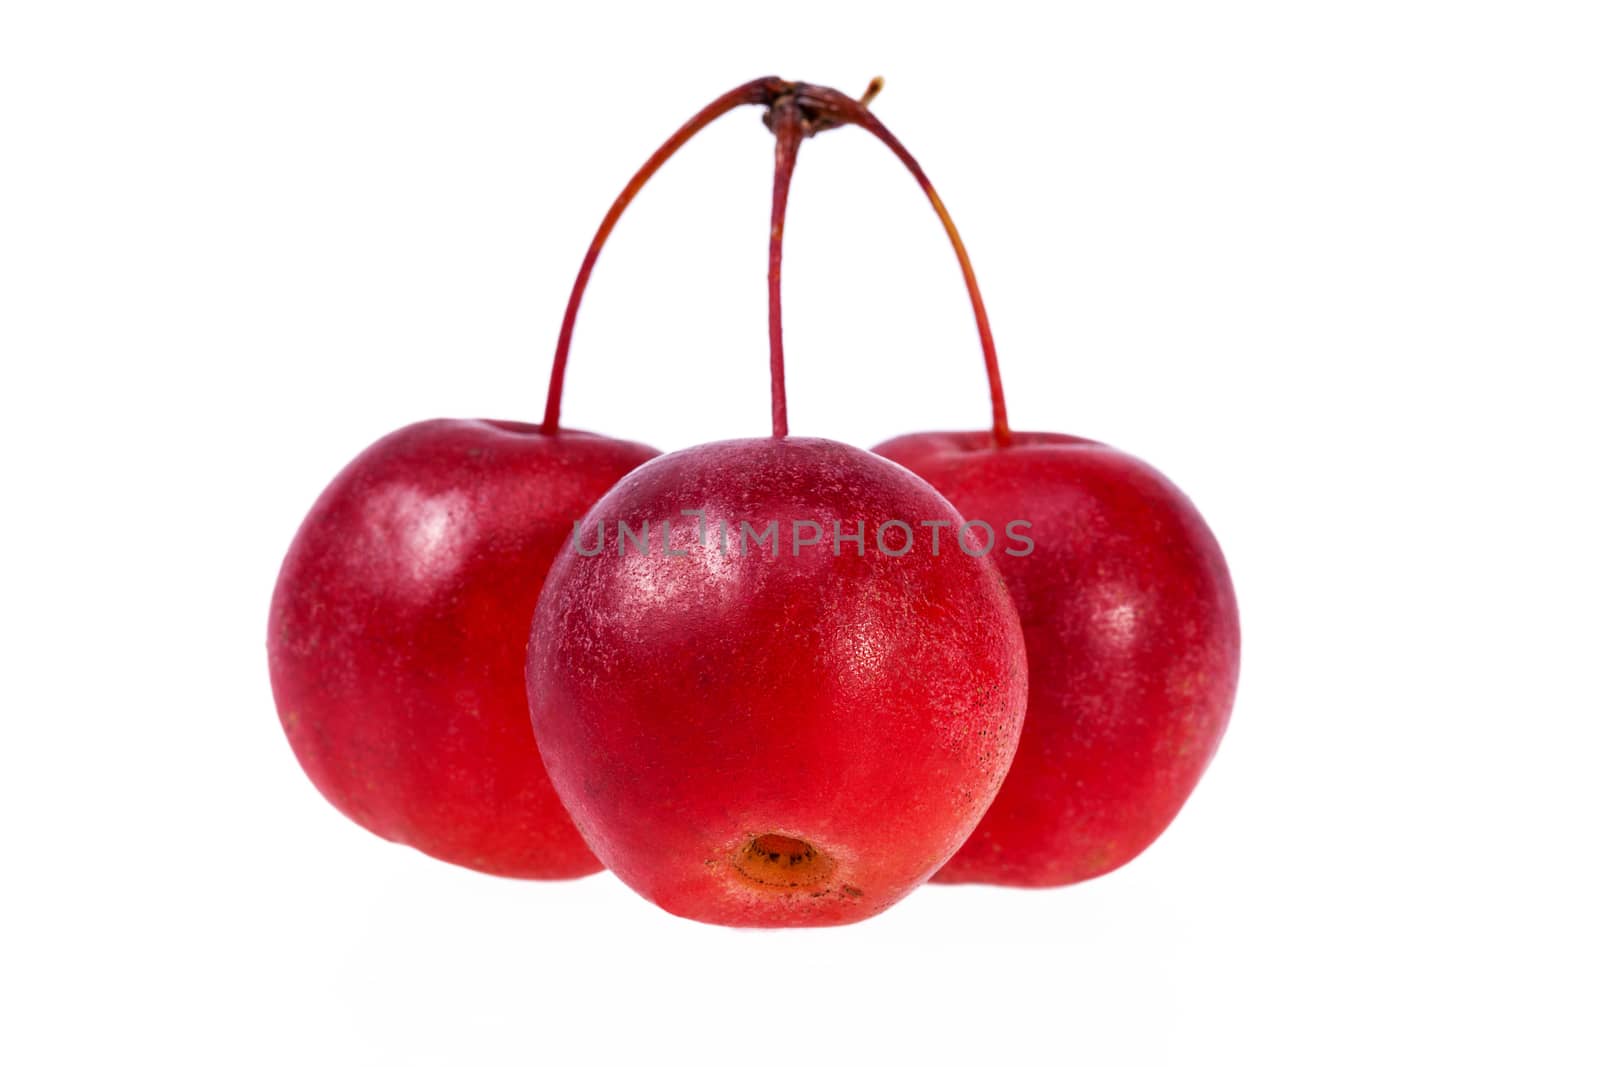 Red paradise apples isolated on white background, close up